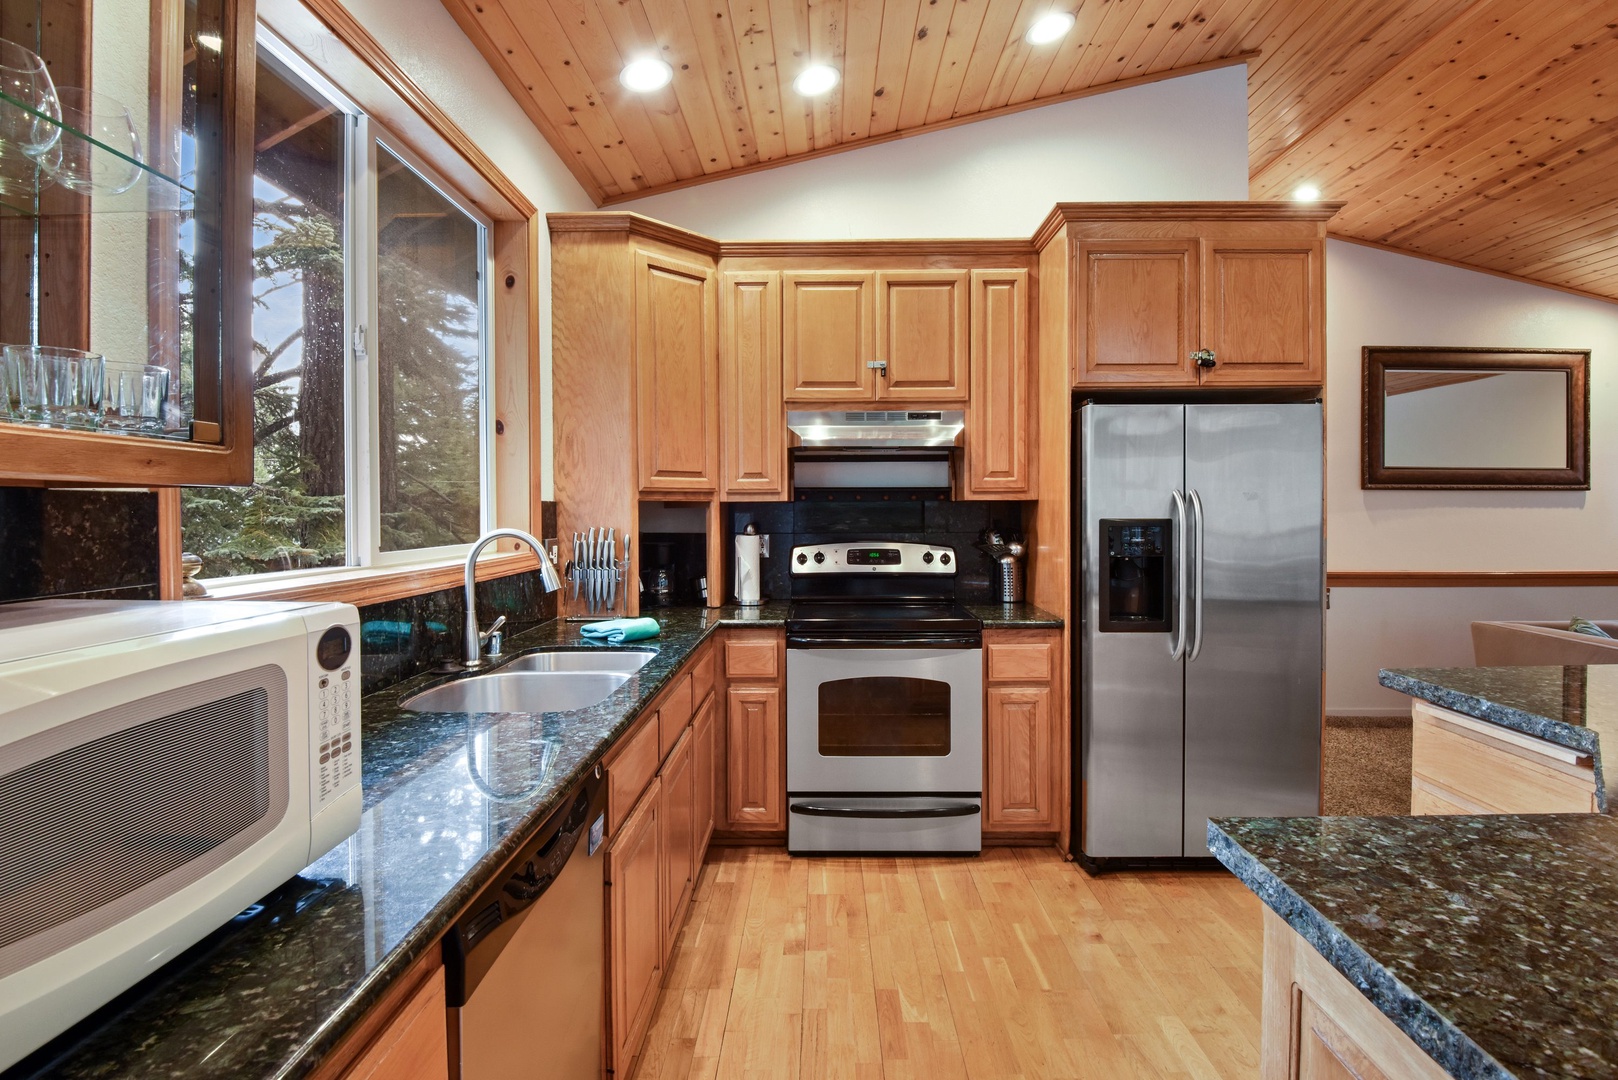 Full kitchen with coffee maker, toaster, and more